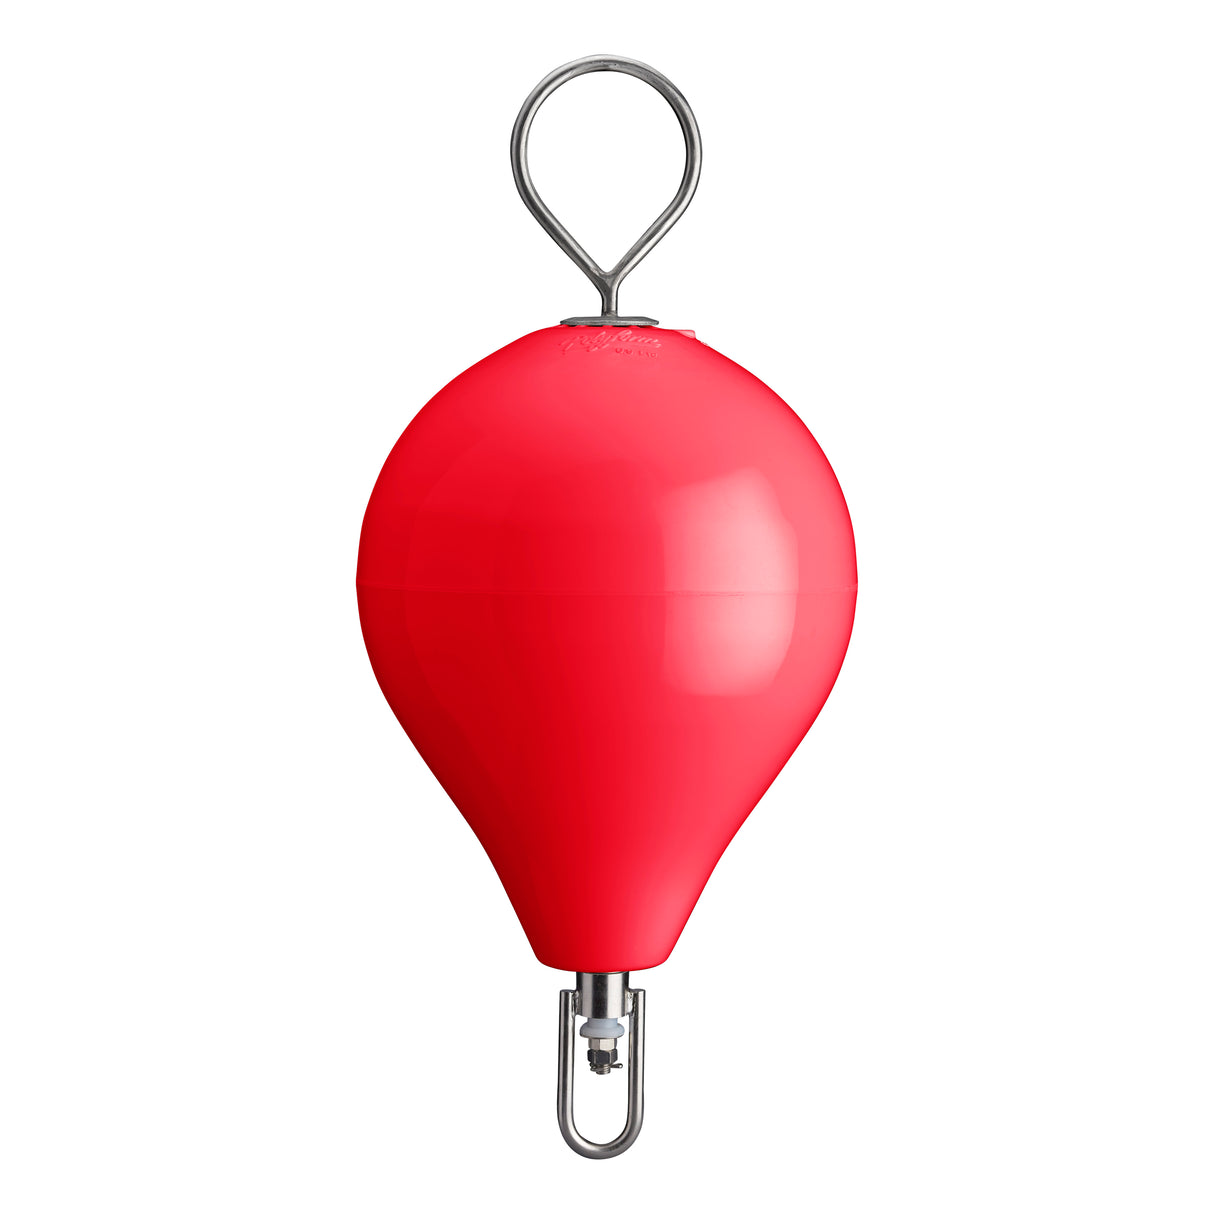 CM-2 Mooring Buoy with stainless steel mooring iron and shackle, red